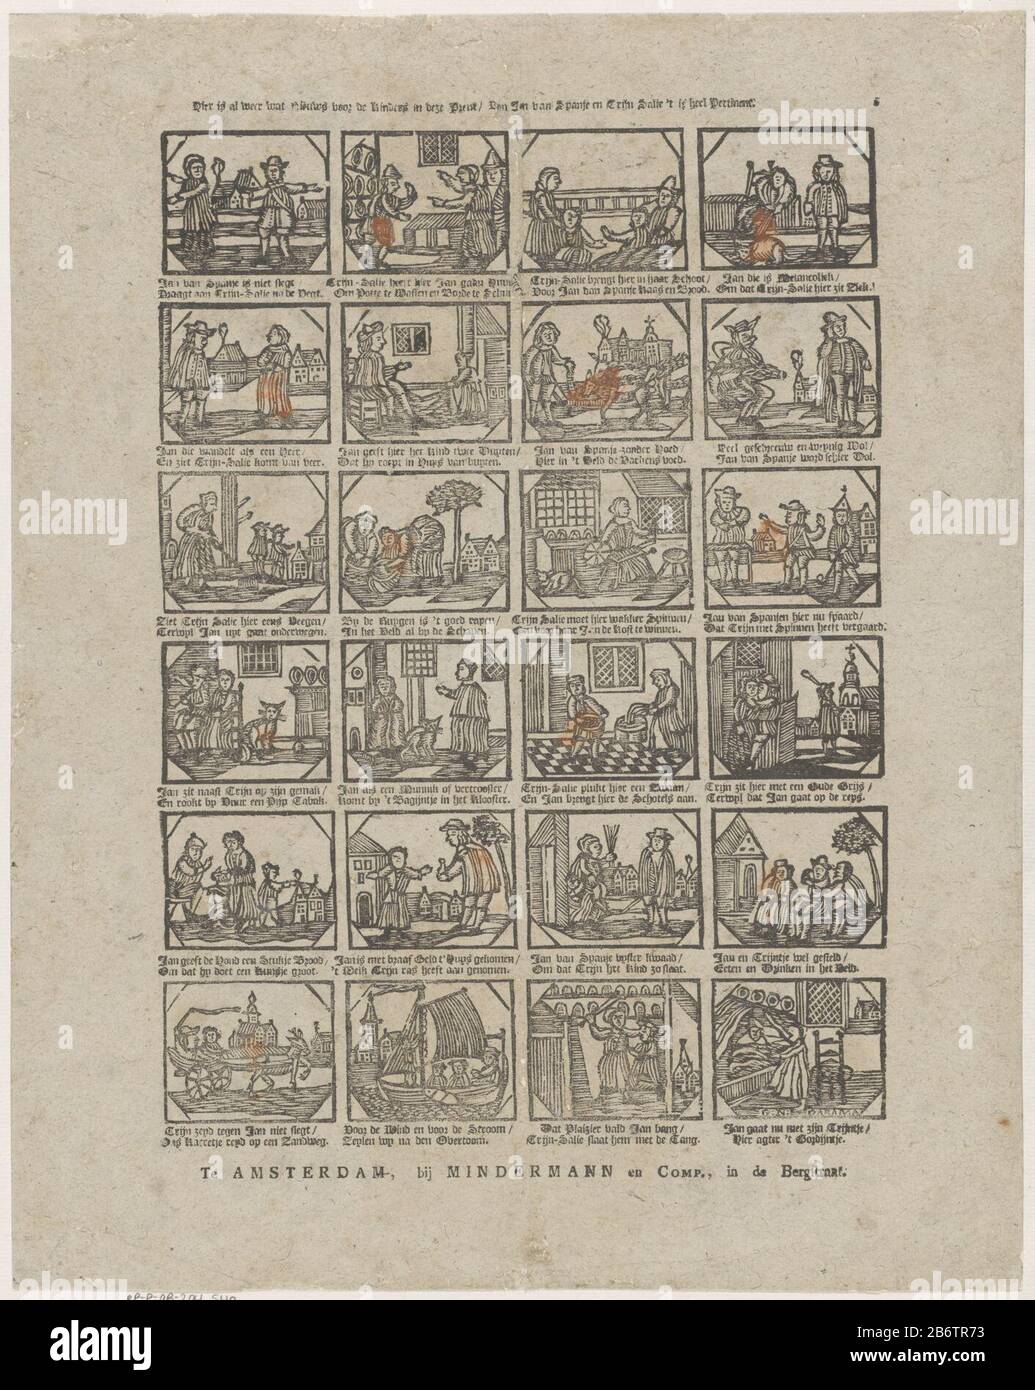 Hier is al weer wat nieuws voor de kinders in deze prent Van jan van Spanje en Trijn Salie 't is heel pertinent (titel op object) Leaf with 24 performances on the life of John of Spain and his wife Trijn Sage. Under each image a two-line verse. Numbered top right: 5. Manufacturer : Seller: Less Mann & Co. (Listed building) publisher: Jan Hendrik de Lang Print Author: anonymous place Manufacture: Seller: Amsterdam Publisher: Deventer Print Author: Netherlands Date: 1814 - 1848 Physical features: woodcut colored in orange; text printing material: paper Technique: woodcut / colors / printing size Stock Photo